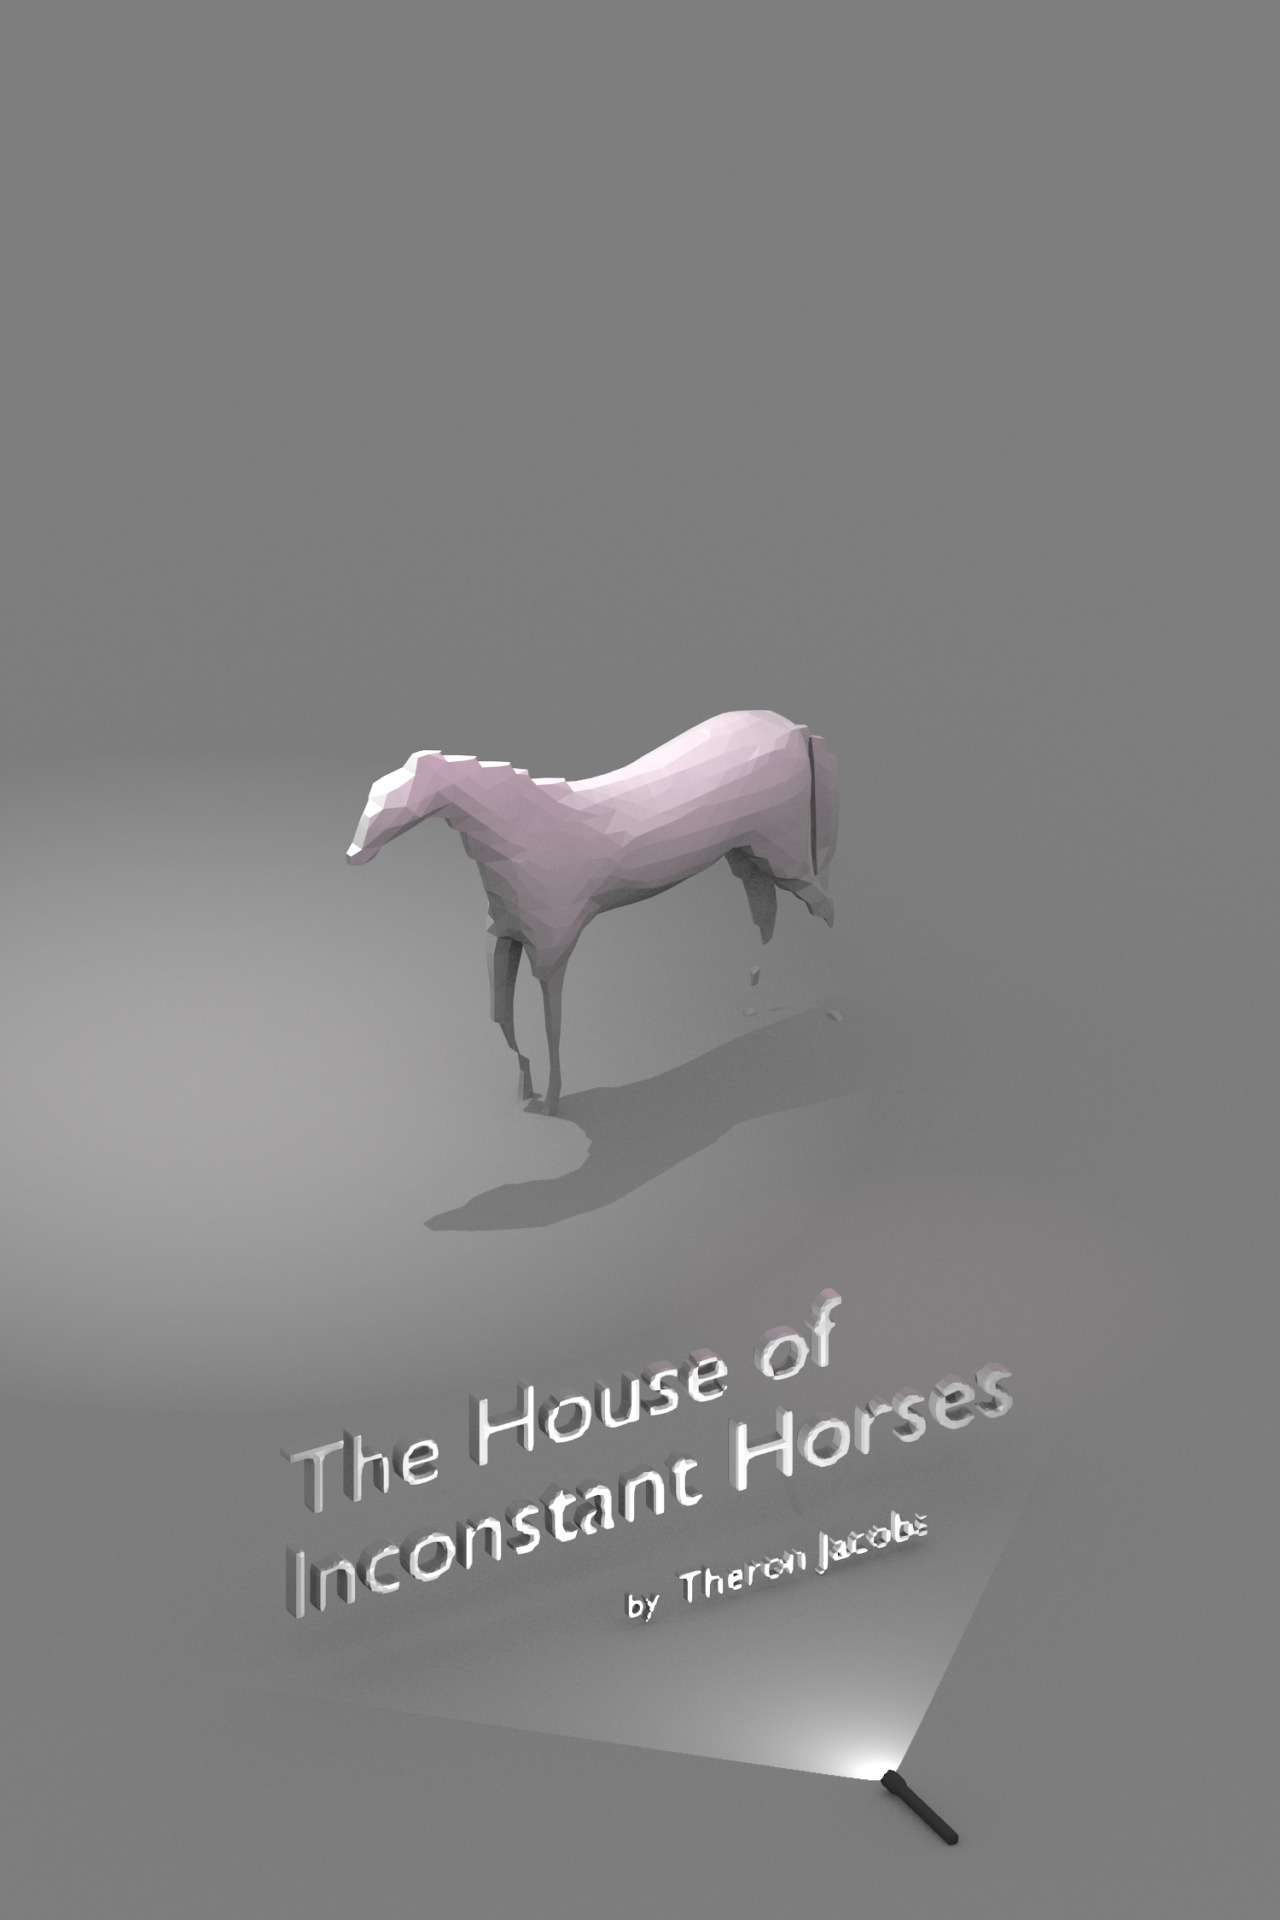 Cover art of The House of Inconstant Horses, by Theron Jacobs